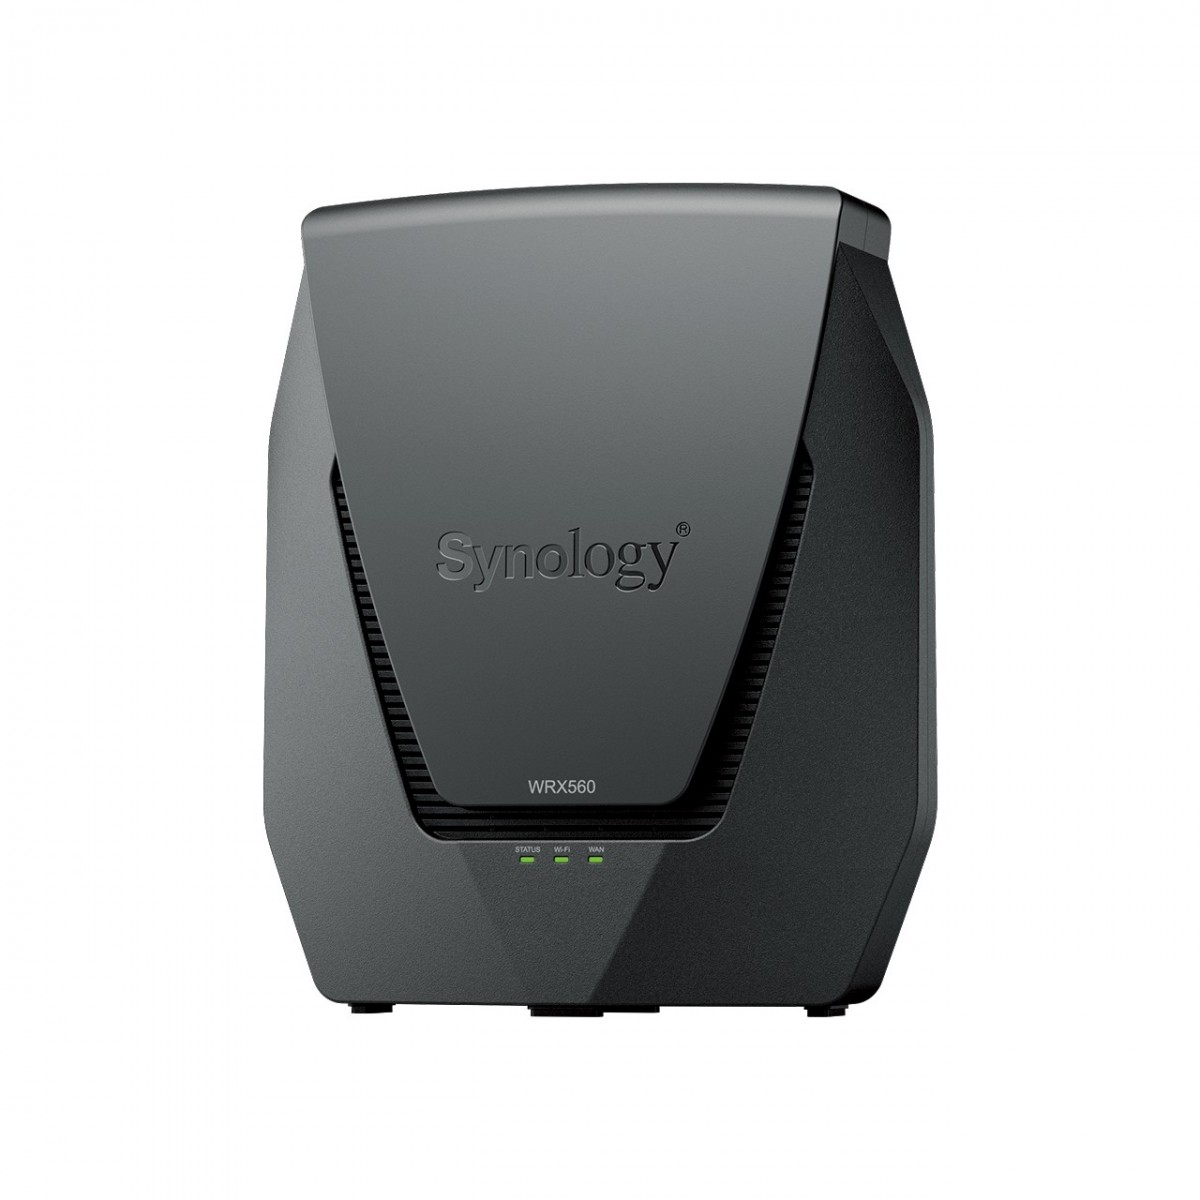 Synology WRX560 Router 1.4GHZ QC 512 MB DDR3 1x 3 - Router